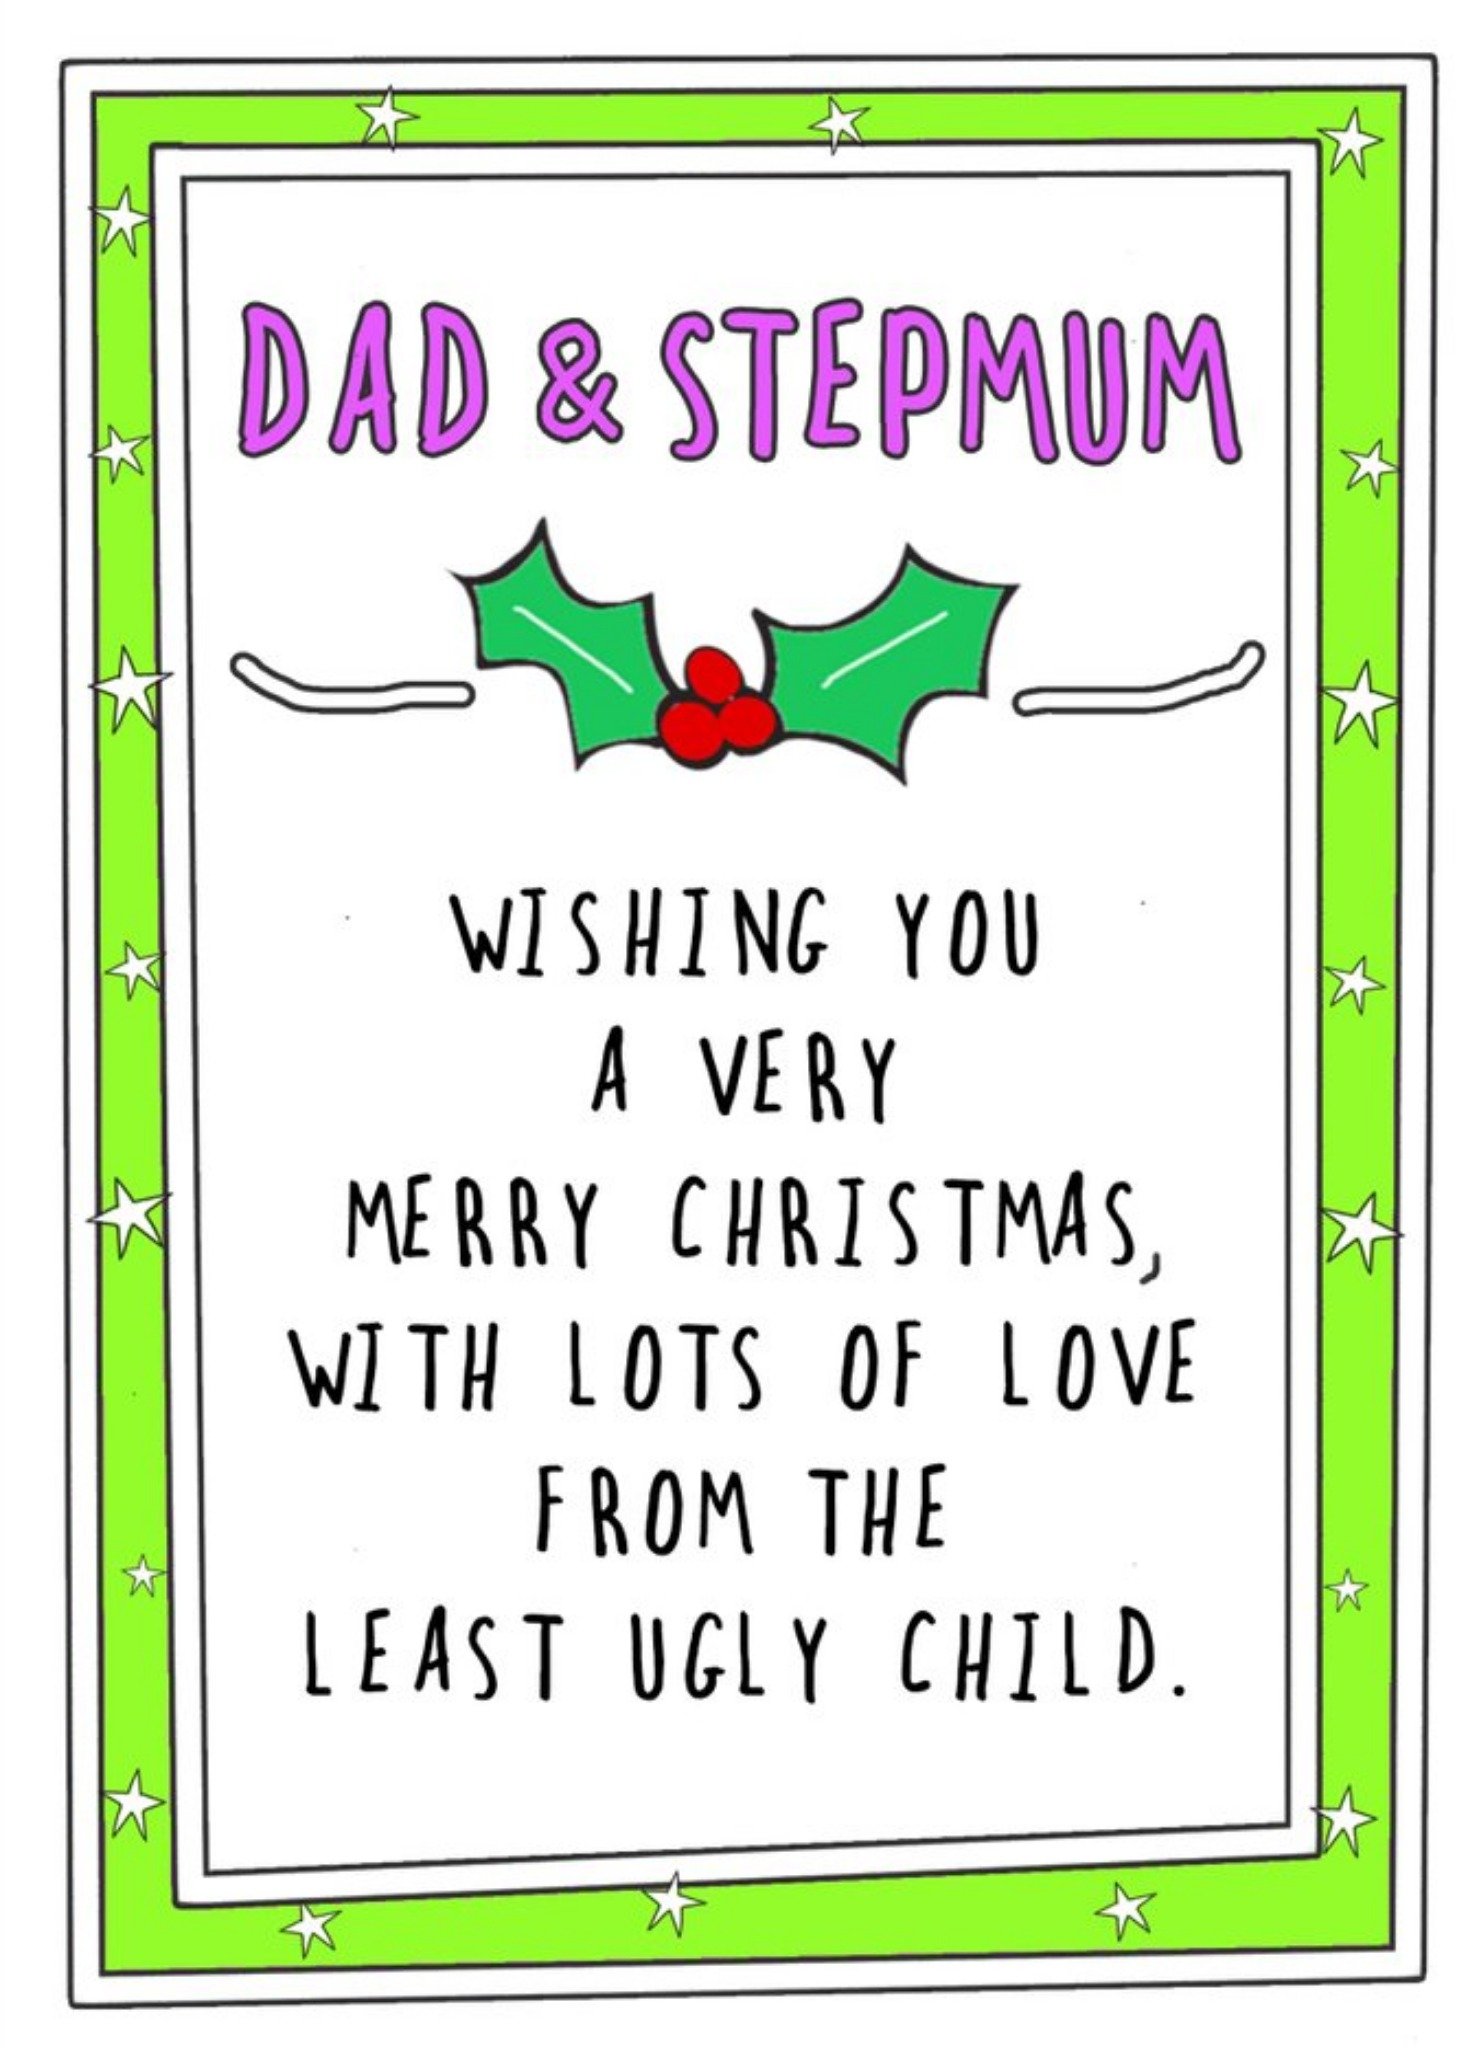 Go La La Funny Dad And Stepmum From Your Least Ugly Child Card, Large